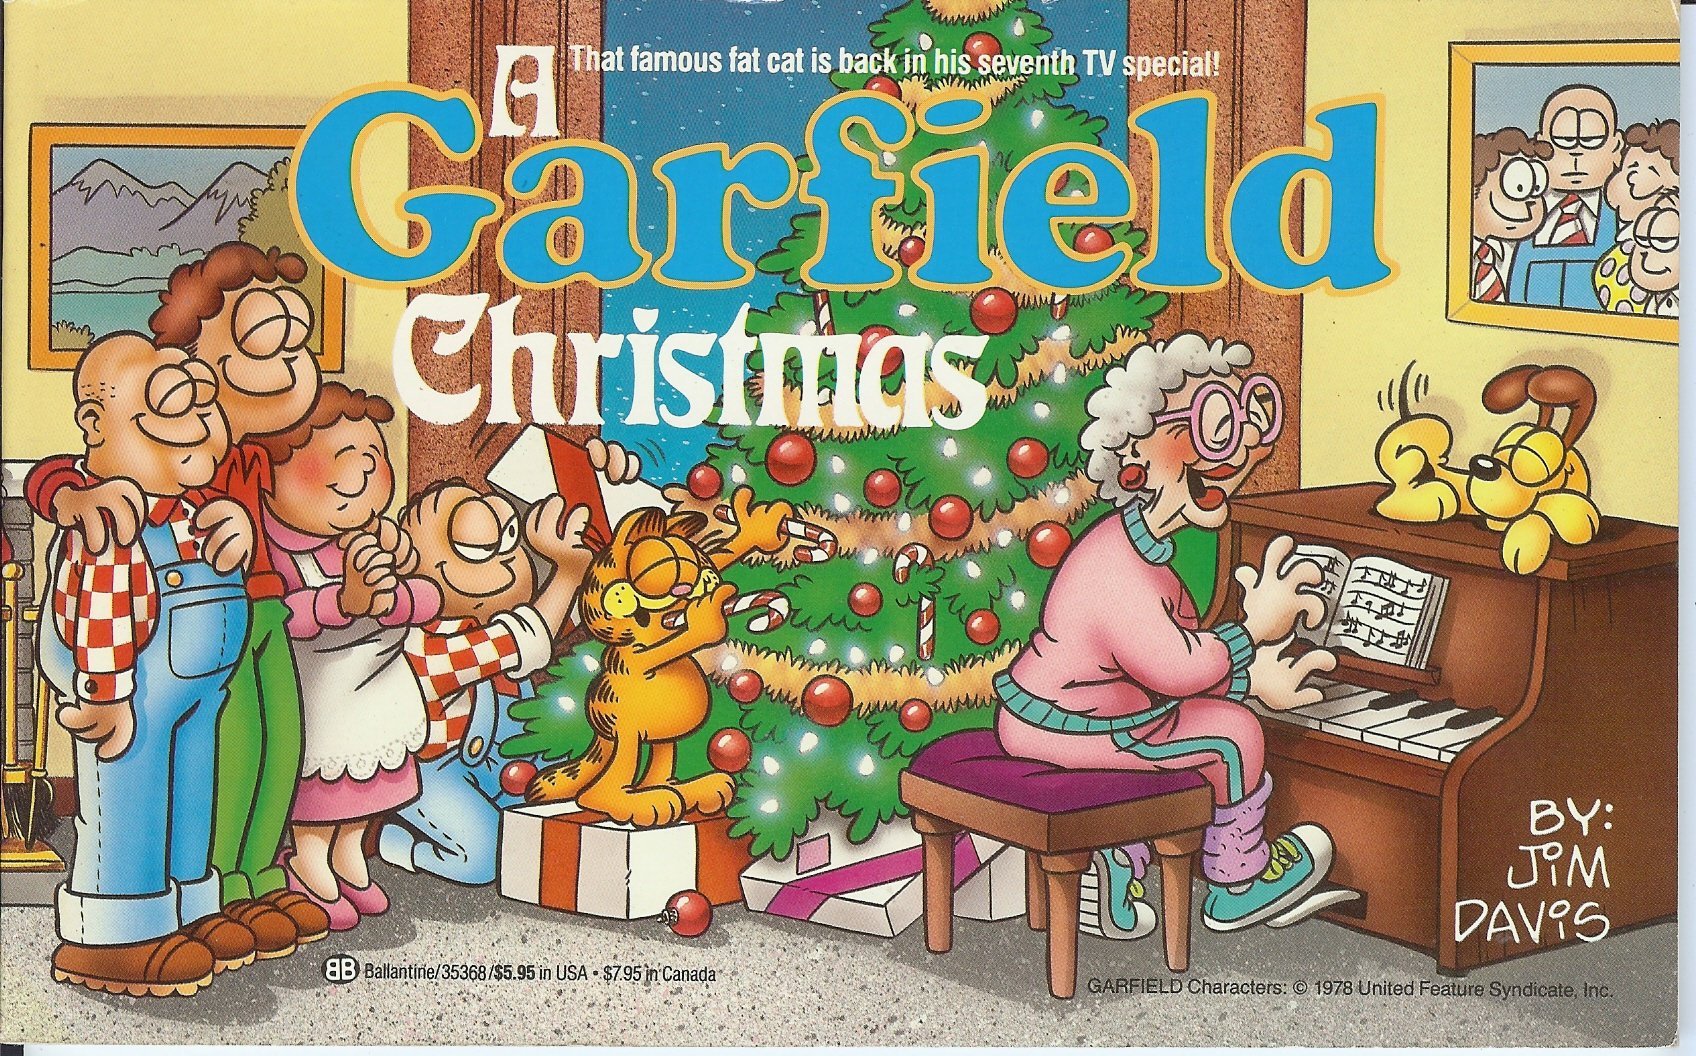 Hulu Now Has All of the Garfield & Several Charlie Brown TV Specials